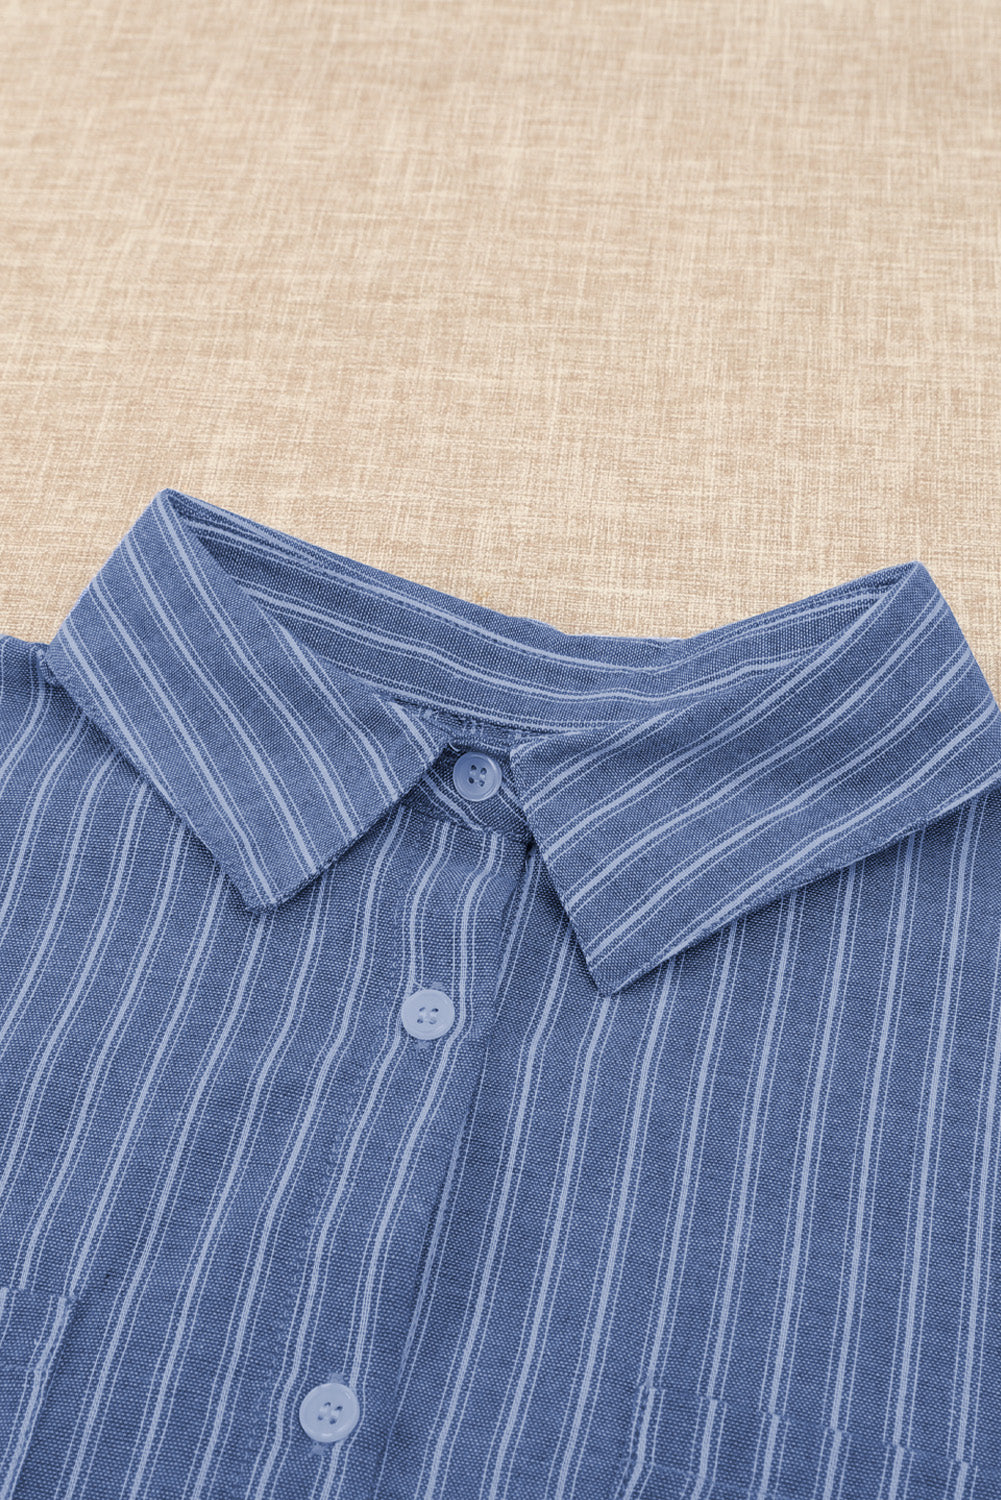 Striped Button-Front Half Sleeve Shirt